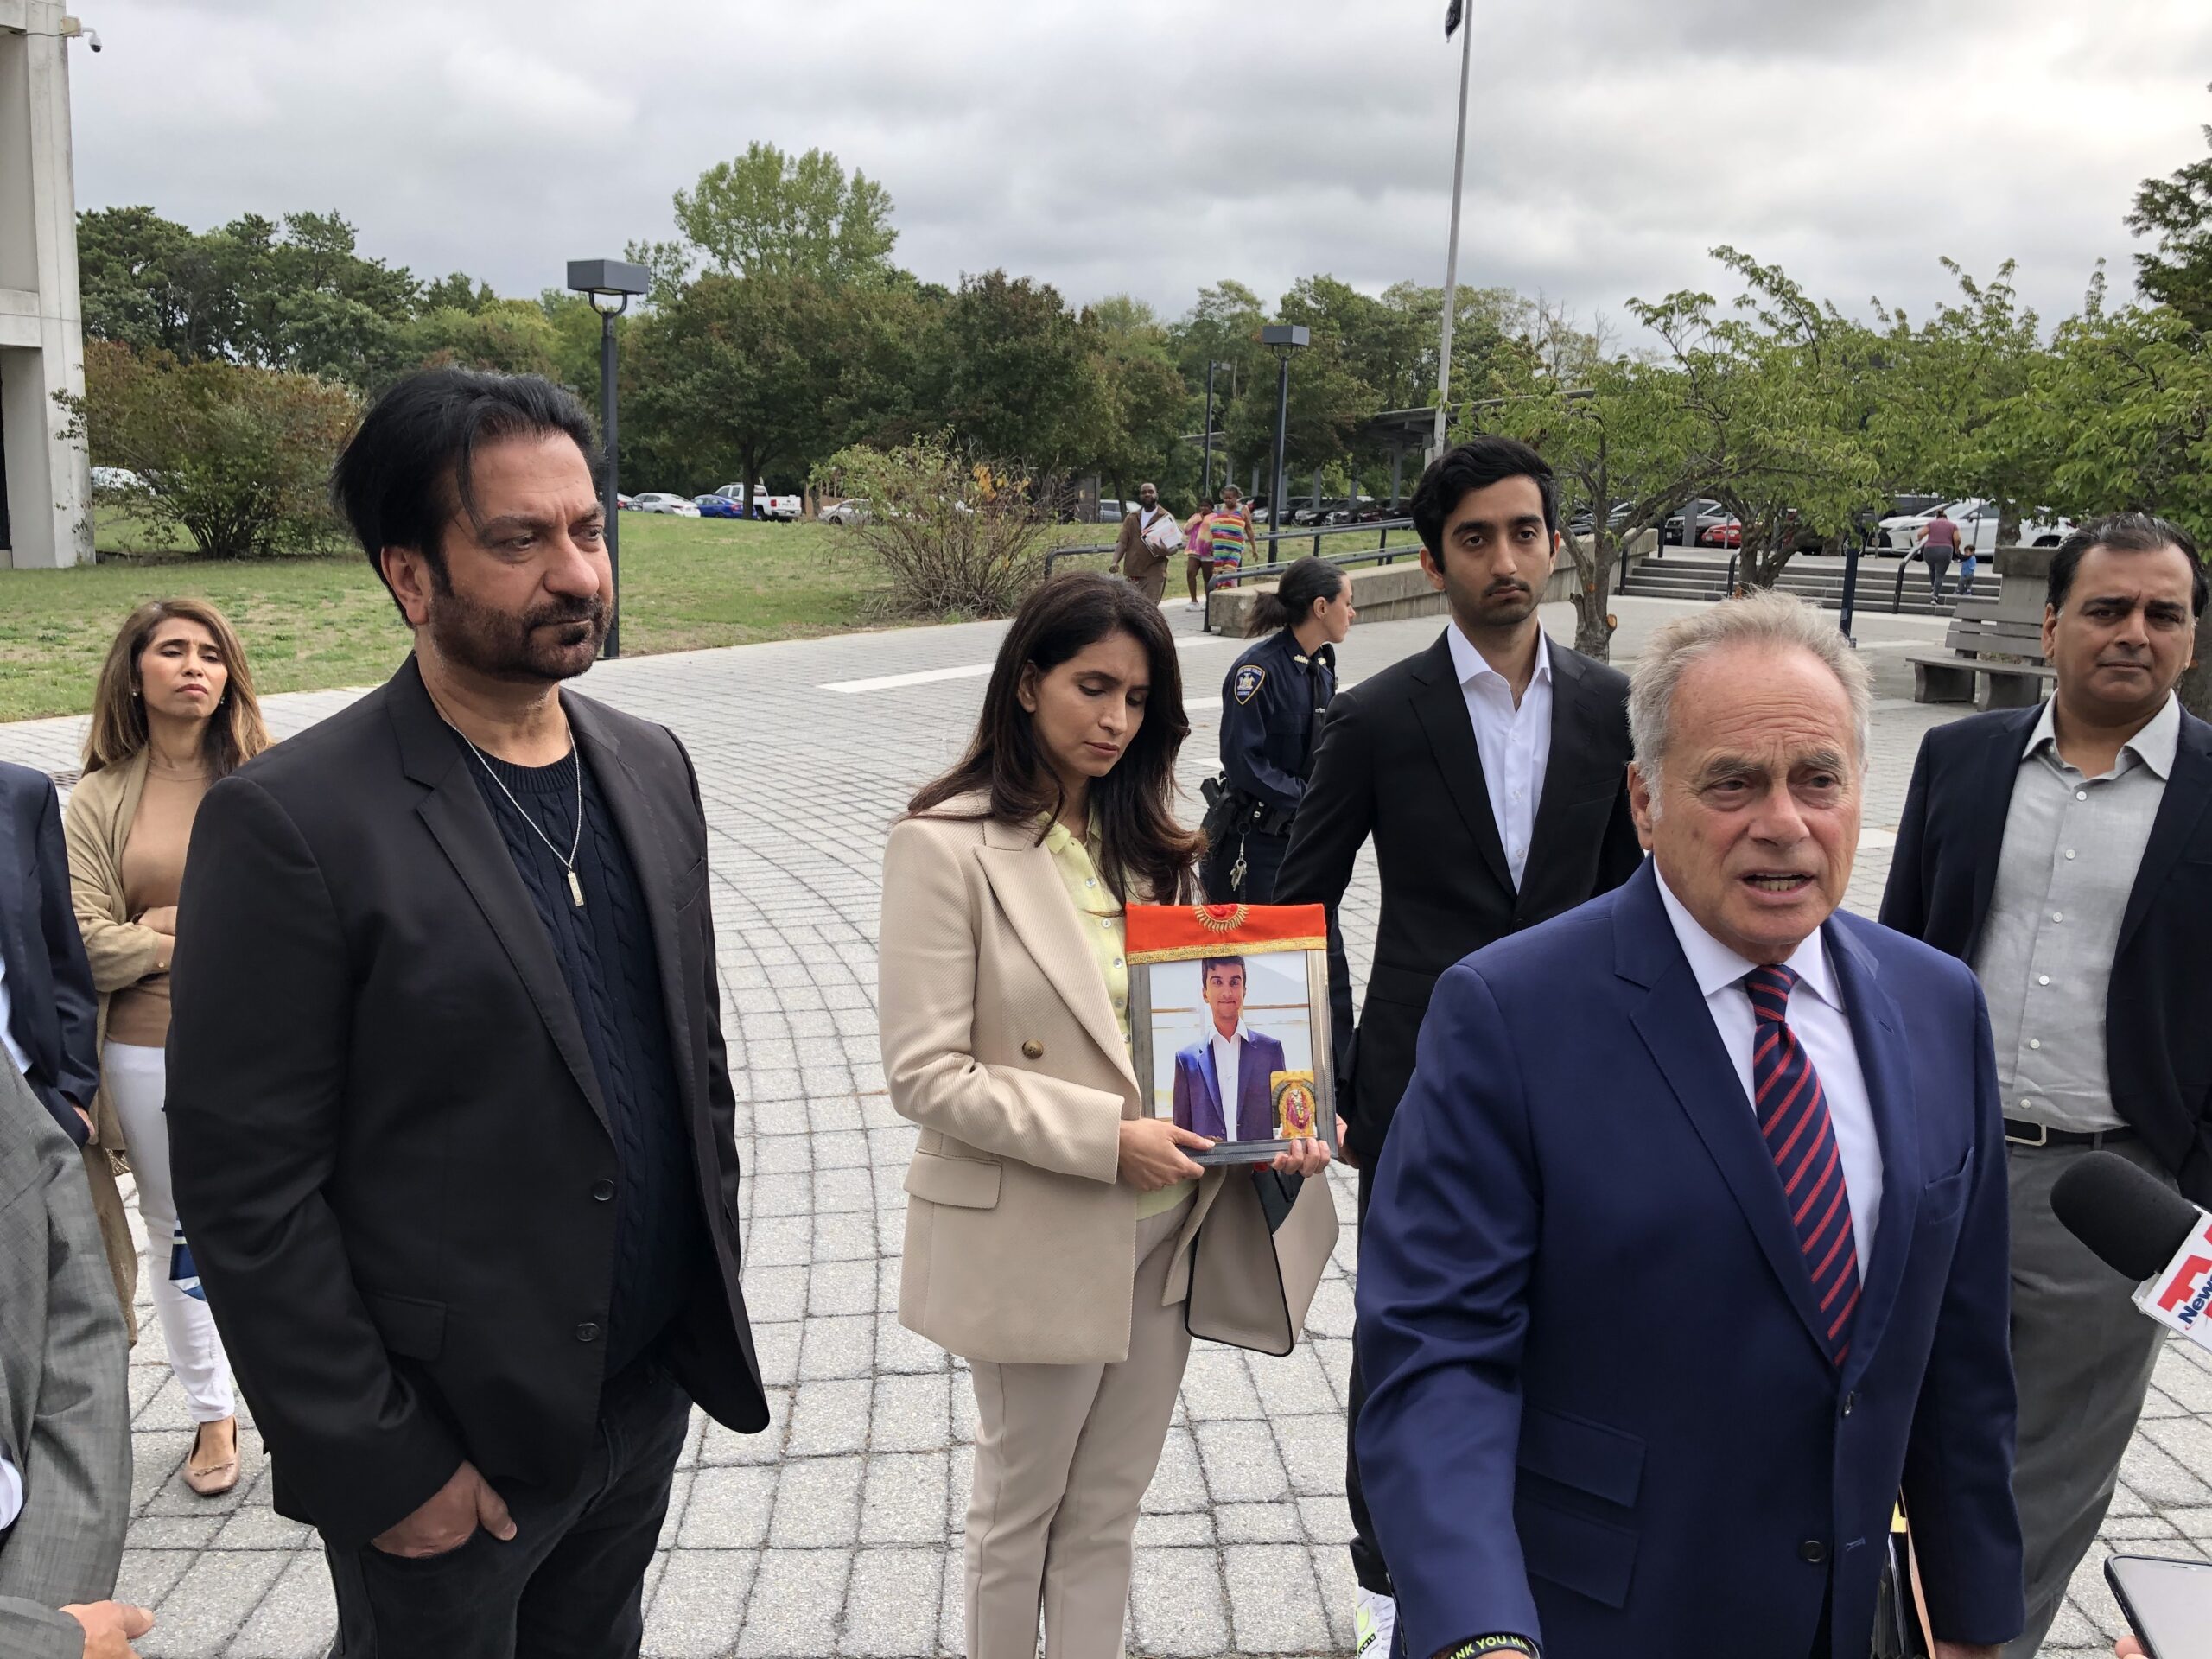 Benjamin Brafman, in the navy blue suit, speaks with the media outside the courthouse about the death of Devesh Kishore Samtani. The victim's mother, Mala Samtani, wearing a tan suit, stands behind Brafman, holding a photograph of her late son. To her right is the victim's father, Kishore Samtani. T.E. McMorrow